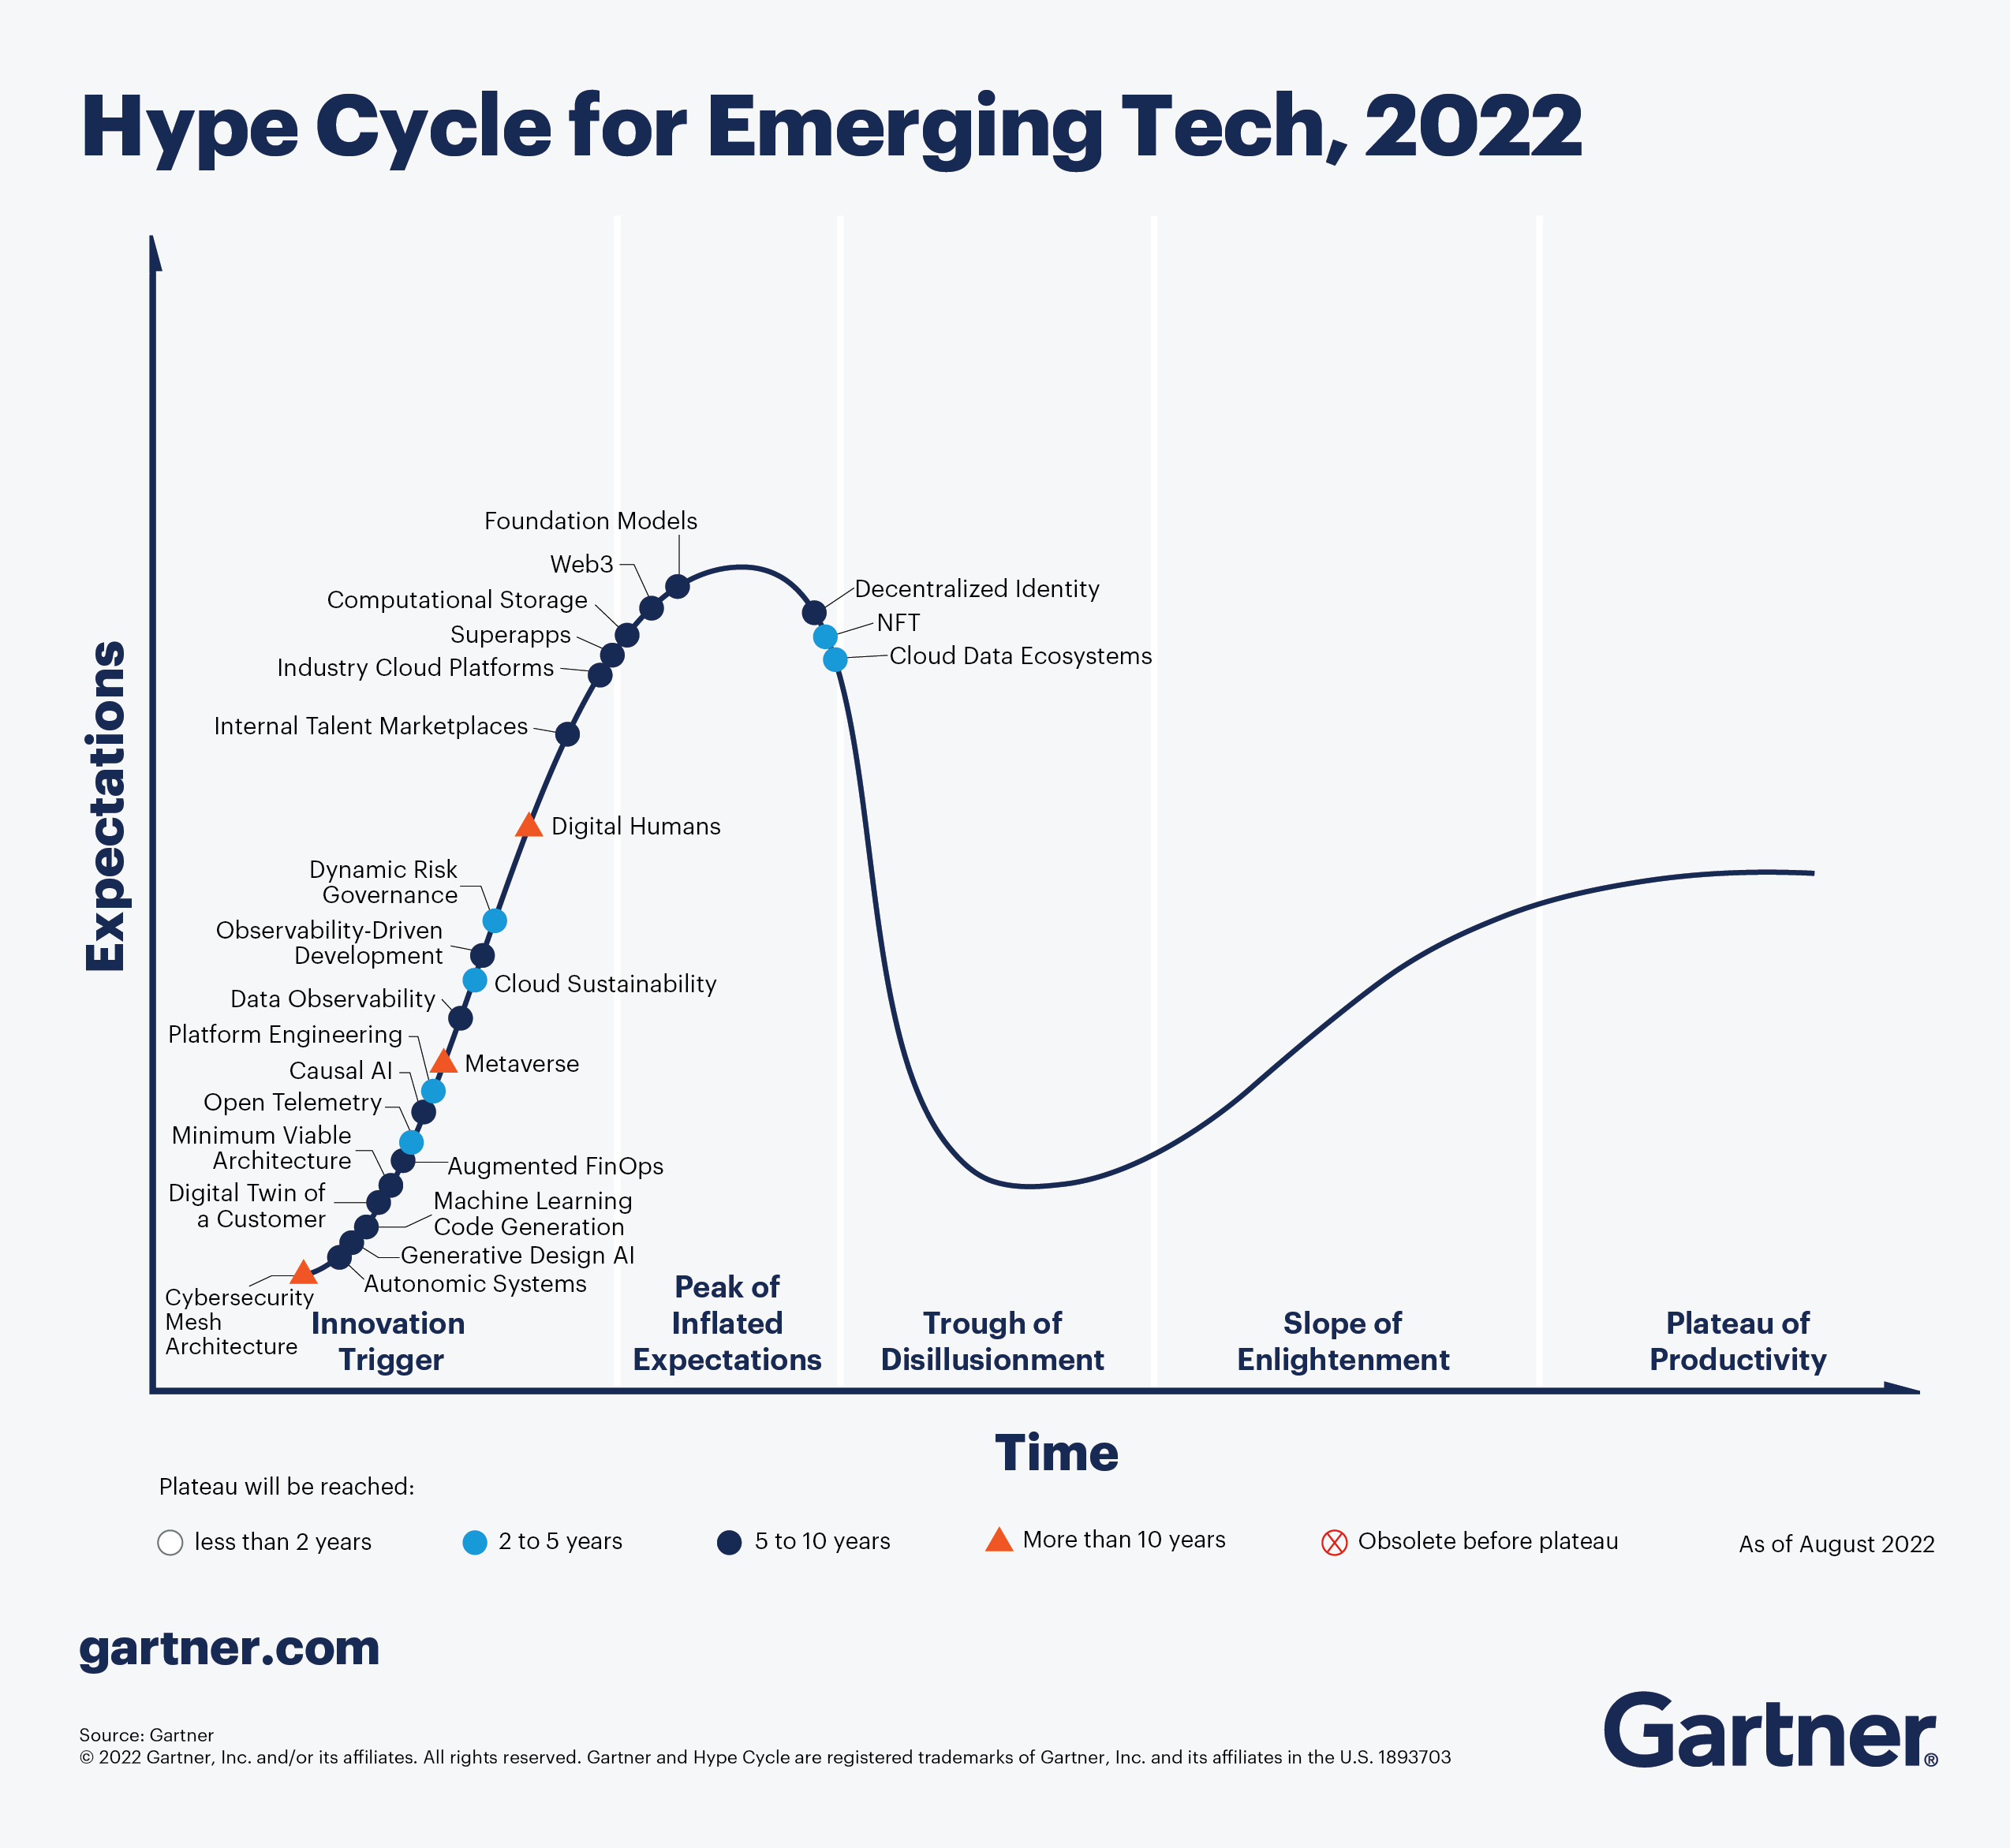 Hype Cycle for Emerging Tech